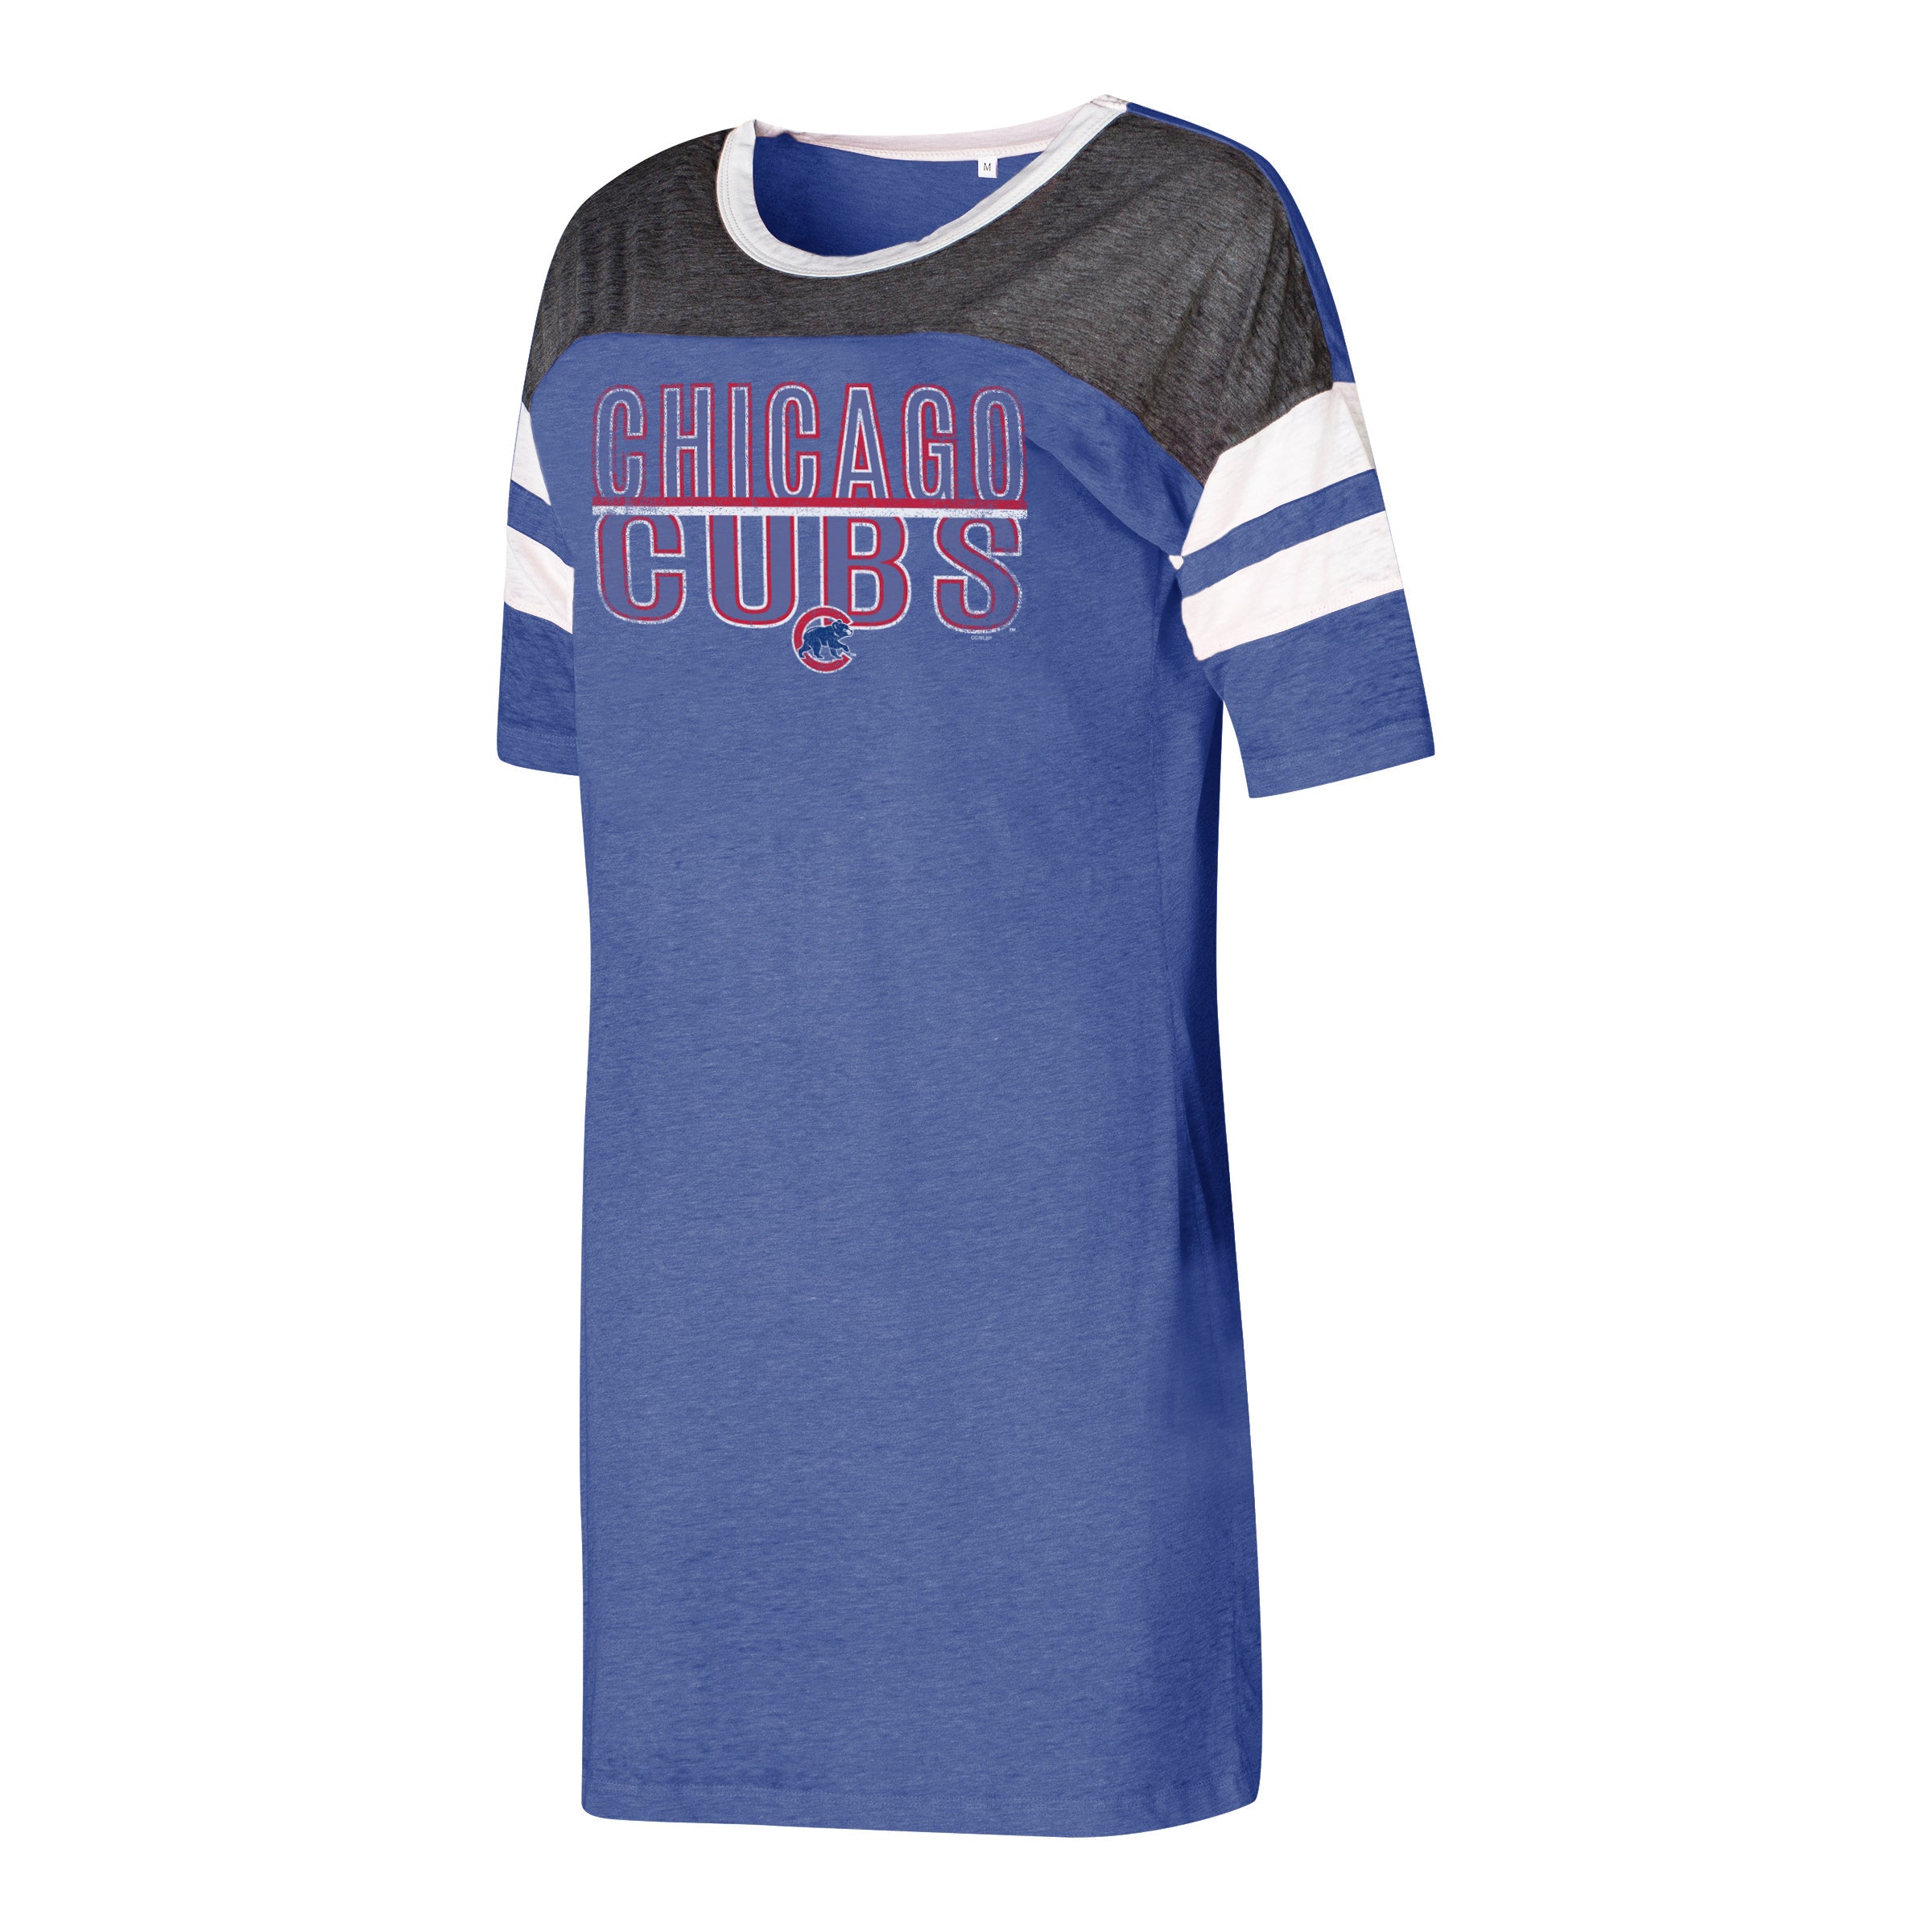 Chicago Cubs Women's Apparel and Accessories - Clark Street Sports